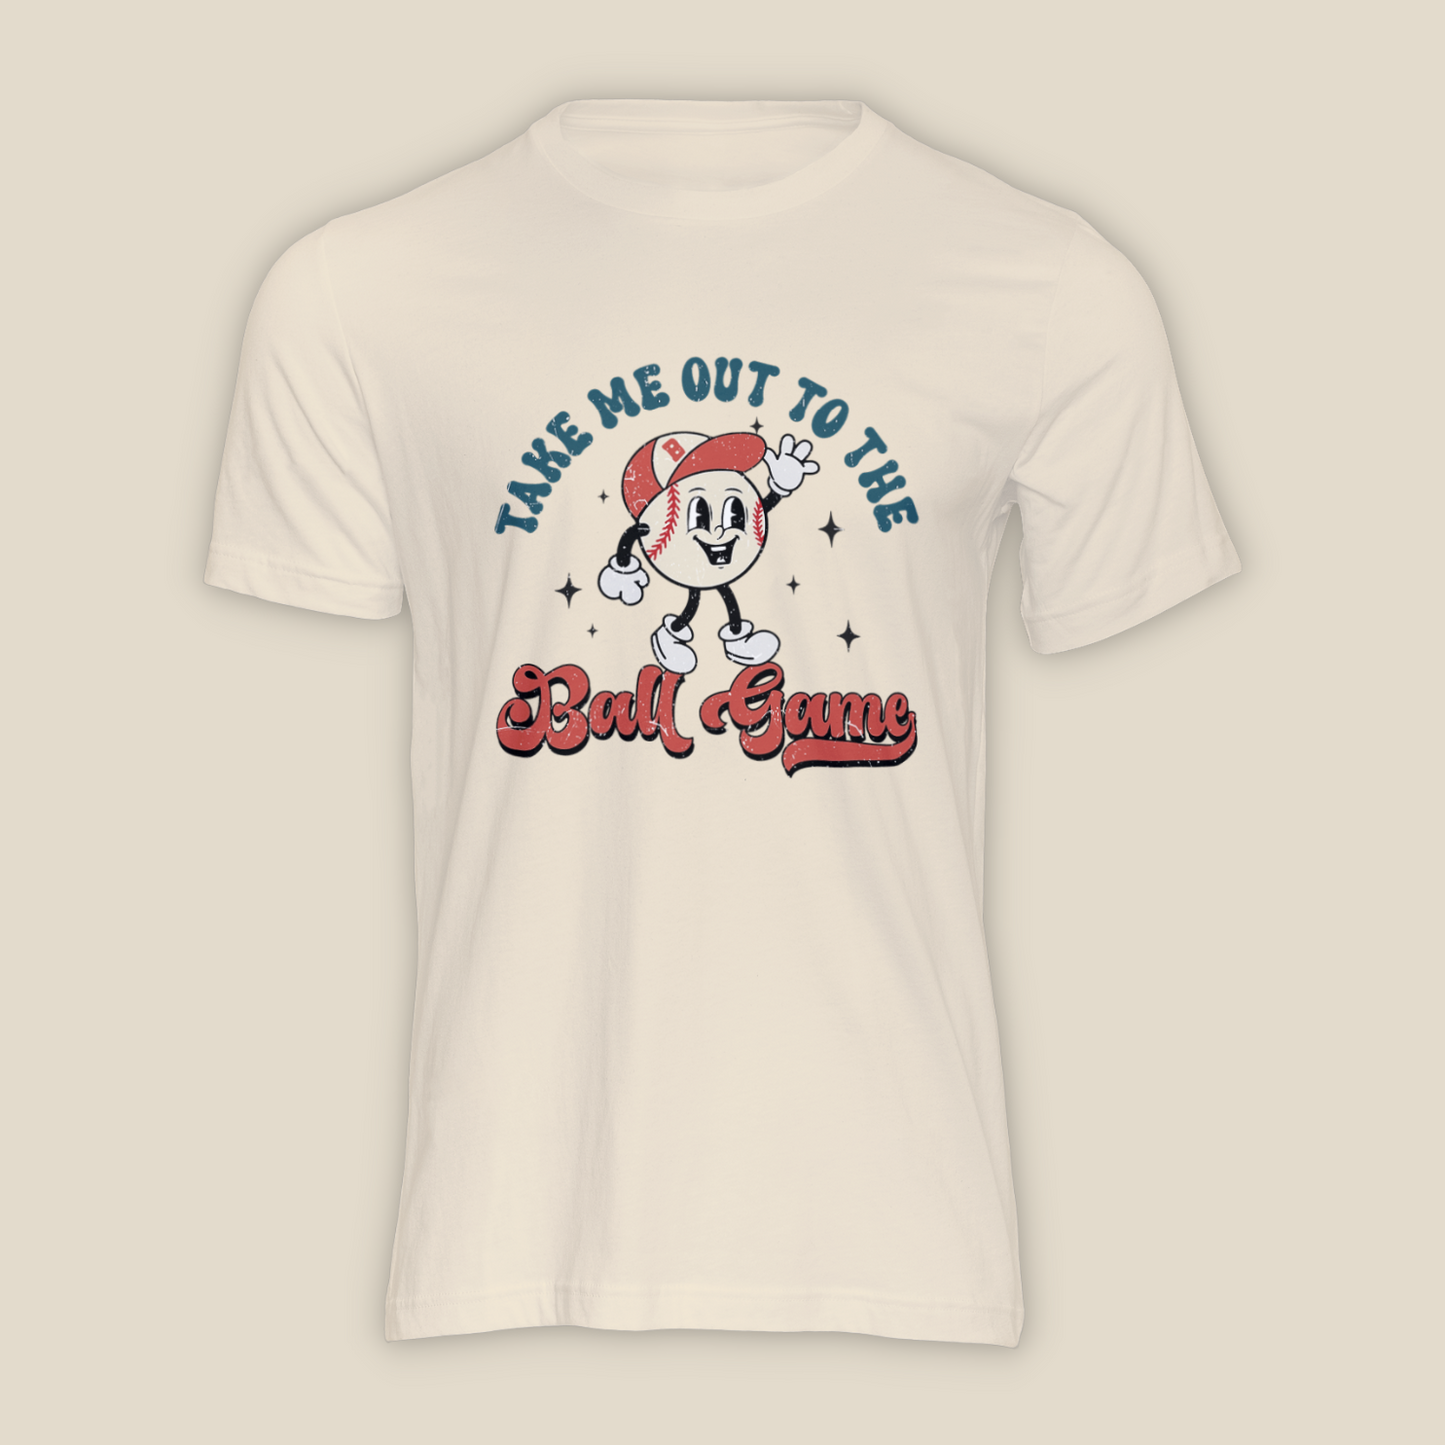 Take Me out to the Ball Game - Shirt